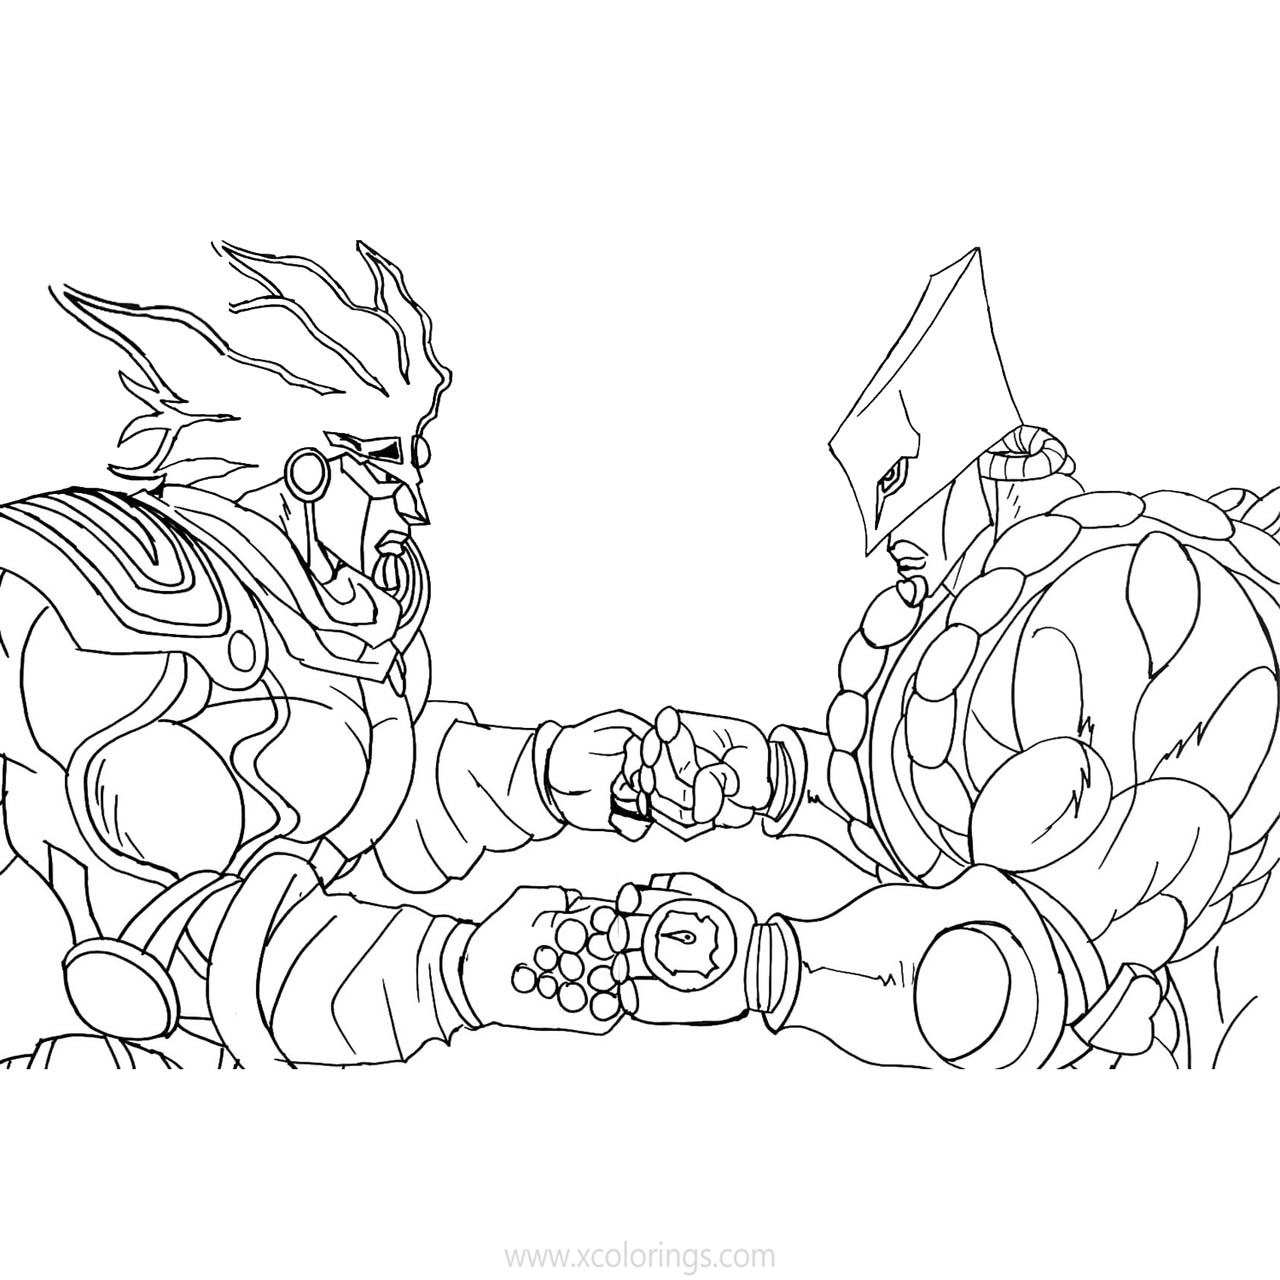 Free JoJo's Bizarre Adventure Coloring Pages Star Platinum Star Platinum and The World printable